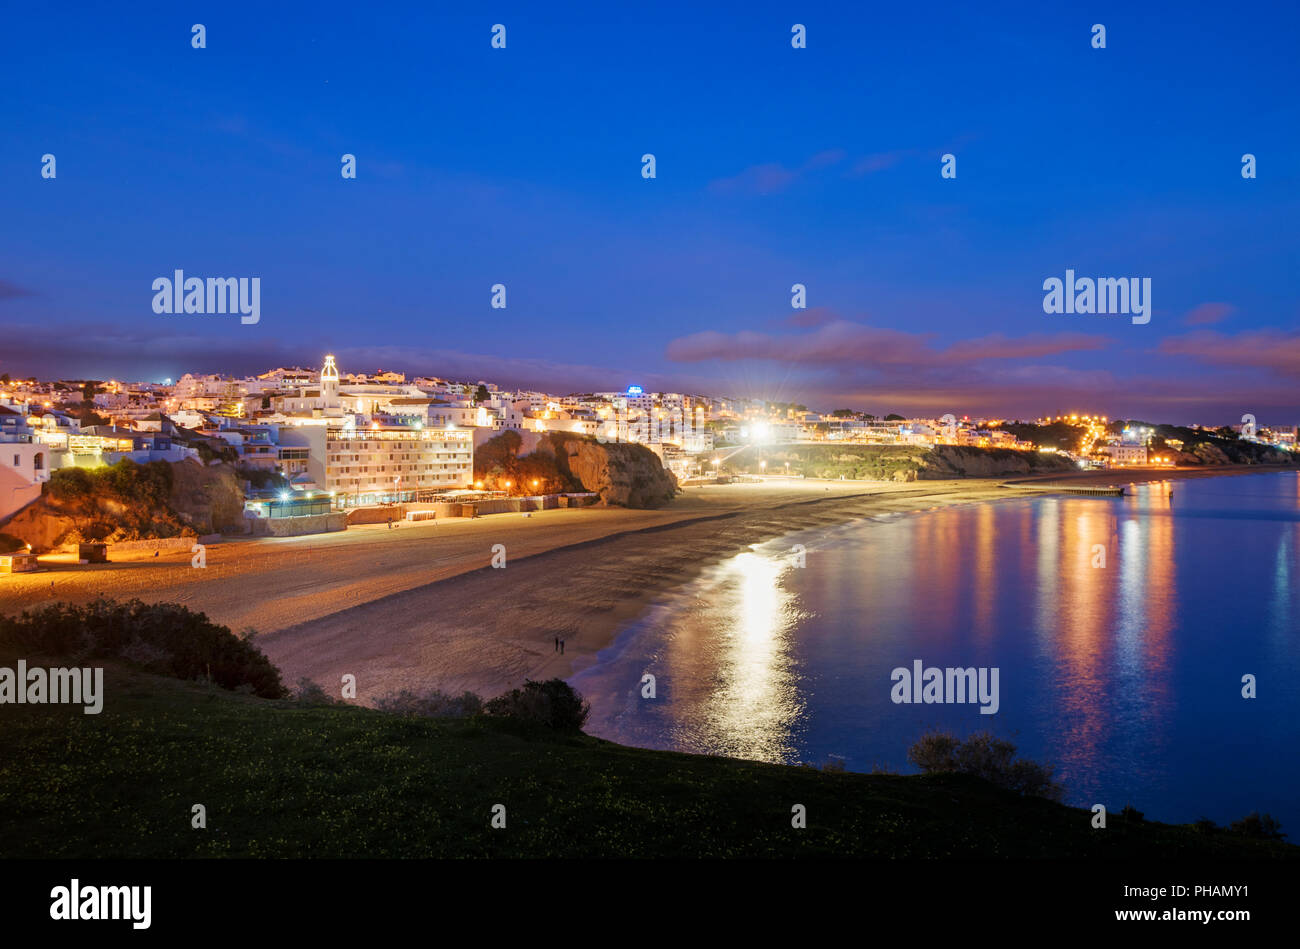 The beach of Albufeira at night. Algarve, Portugal Stock Photo